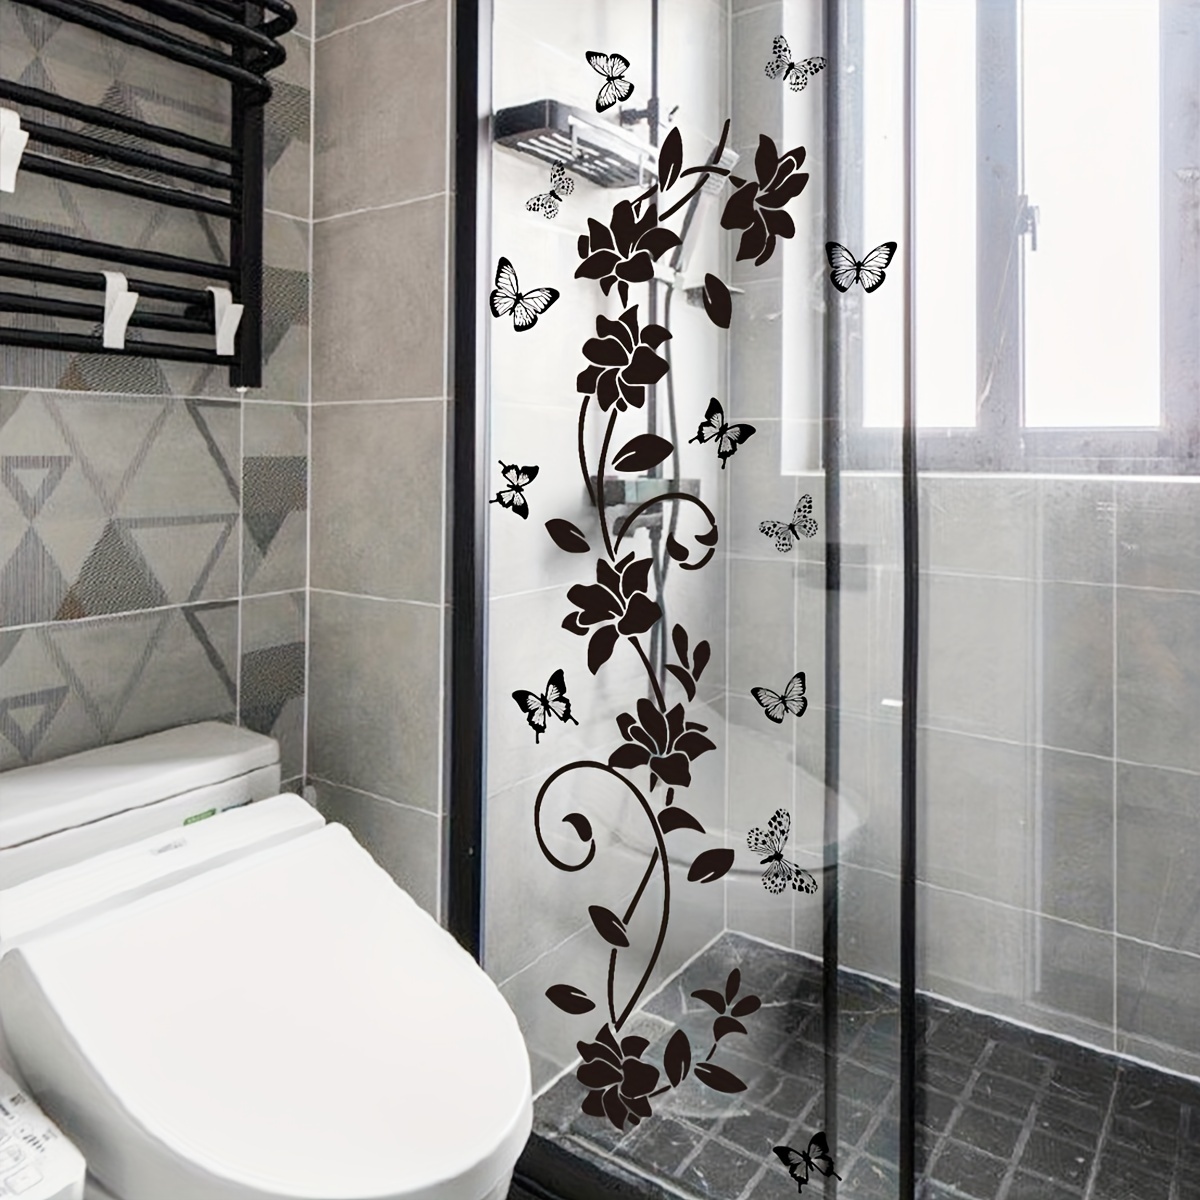 

Black Floral Butterfly Vine Mirror Glass Decal For Home Bathroom Decor, Self-adhesive Wall Sticker Made Of Plastic, No Electricity Required